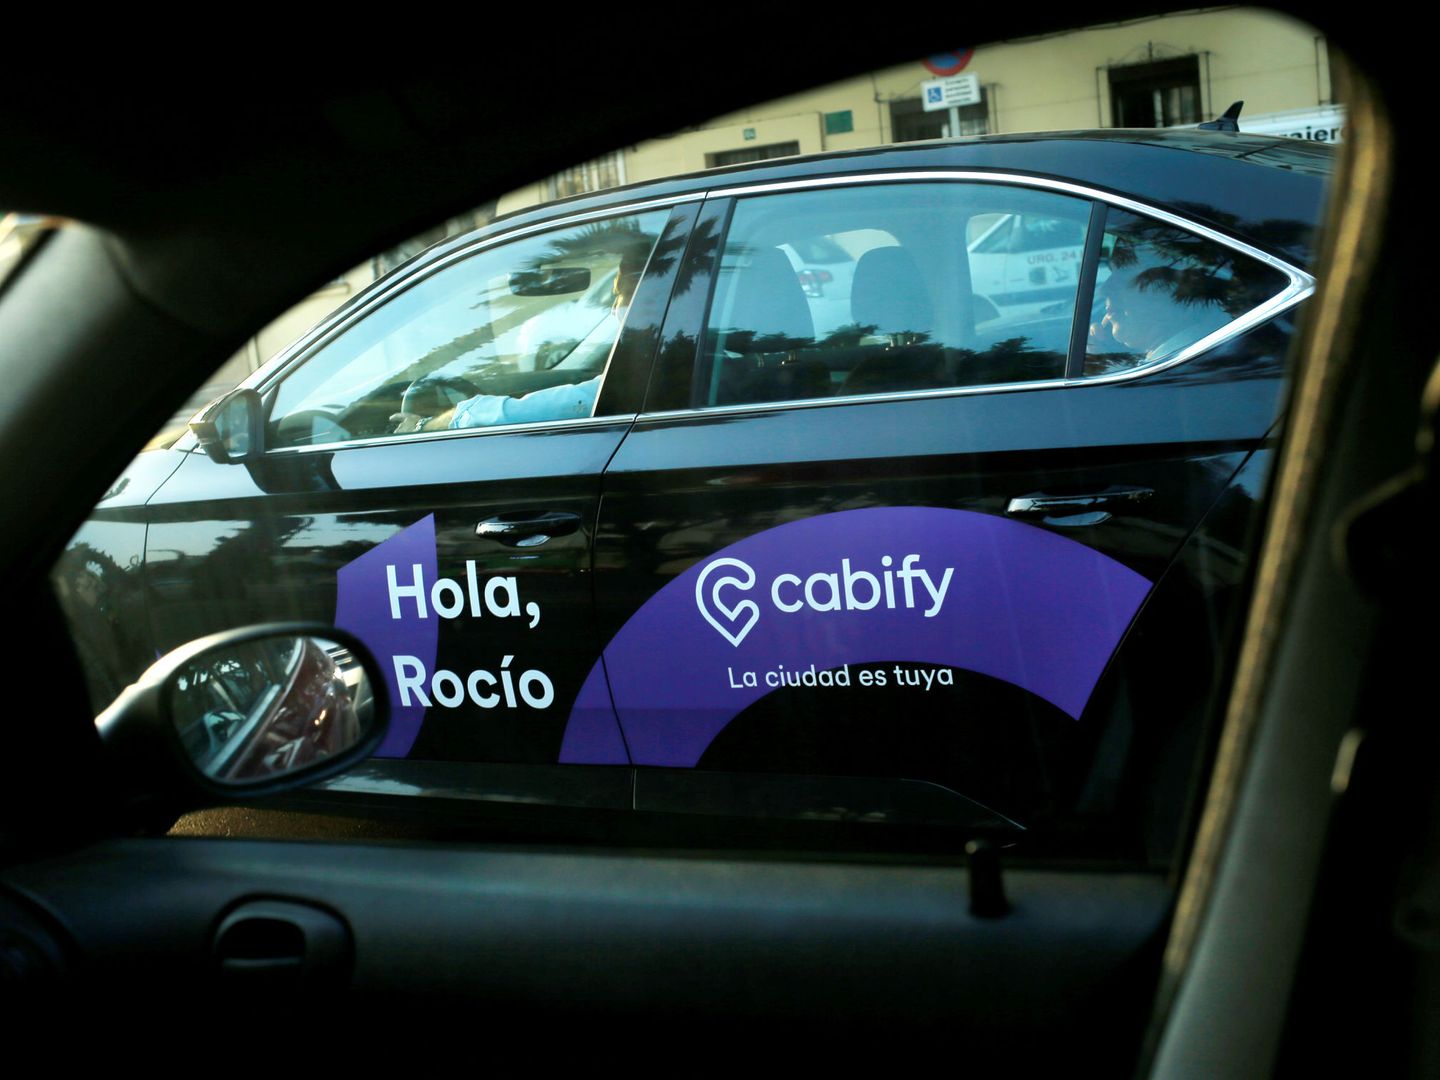 A Cabify taxi car is seen through the window of a car in Malaga, southern Spain August 3, 2018. REUTERS Jon Nazca